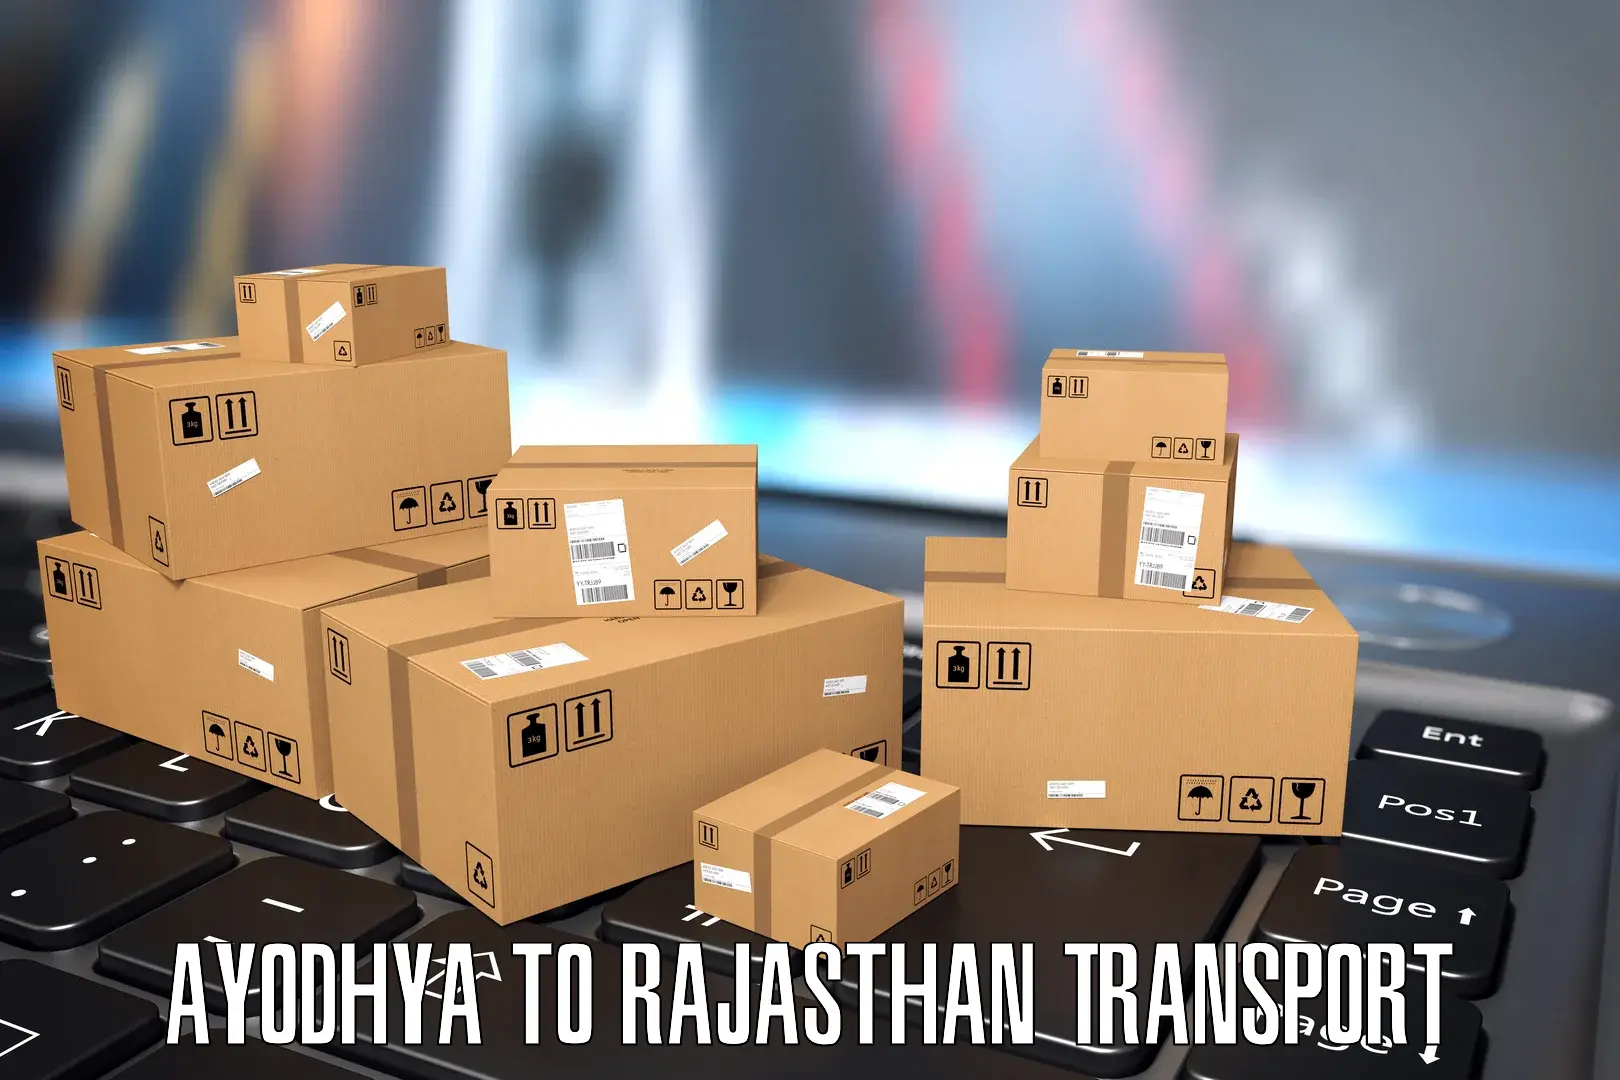 Container transport service Ayodhya to Balotra